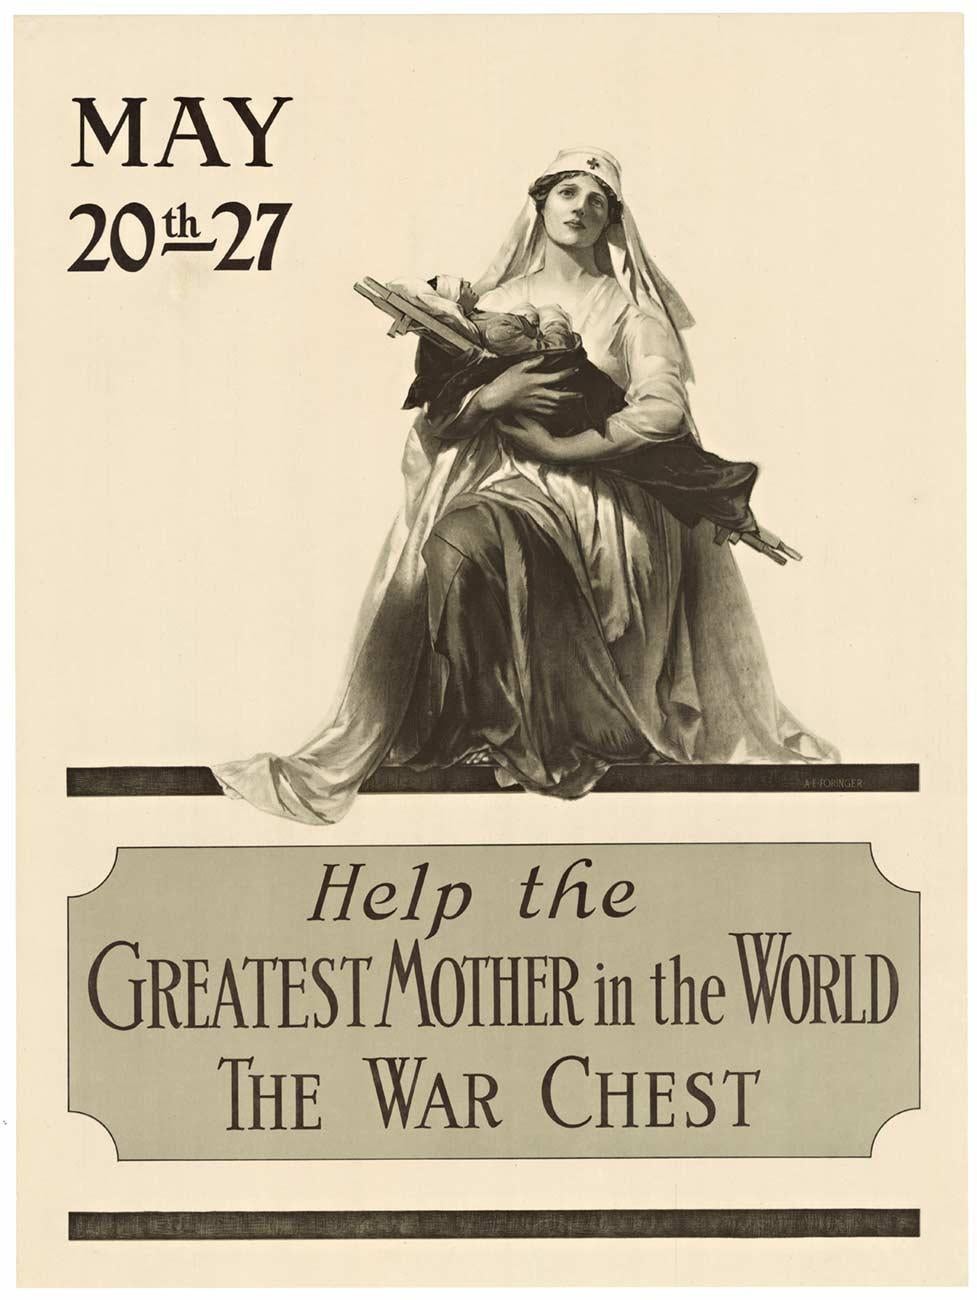 Original Help the Greatest Mother in the World, The War Chest, vintage poster - Print by Earl Alonzo Foringer